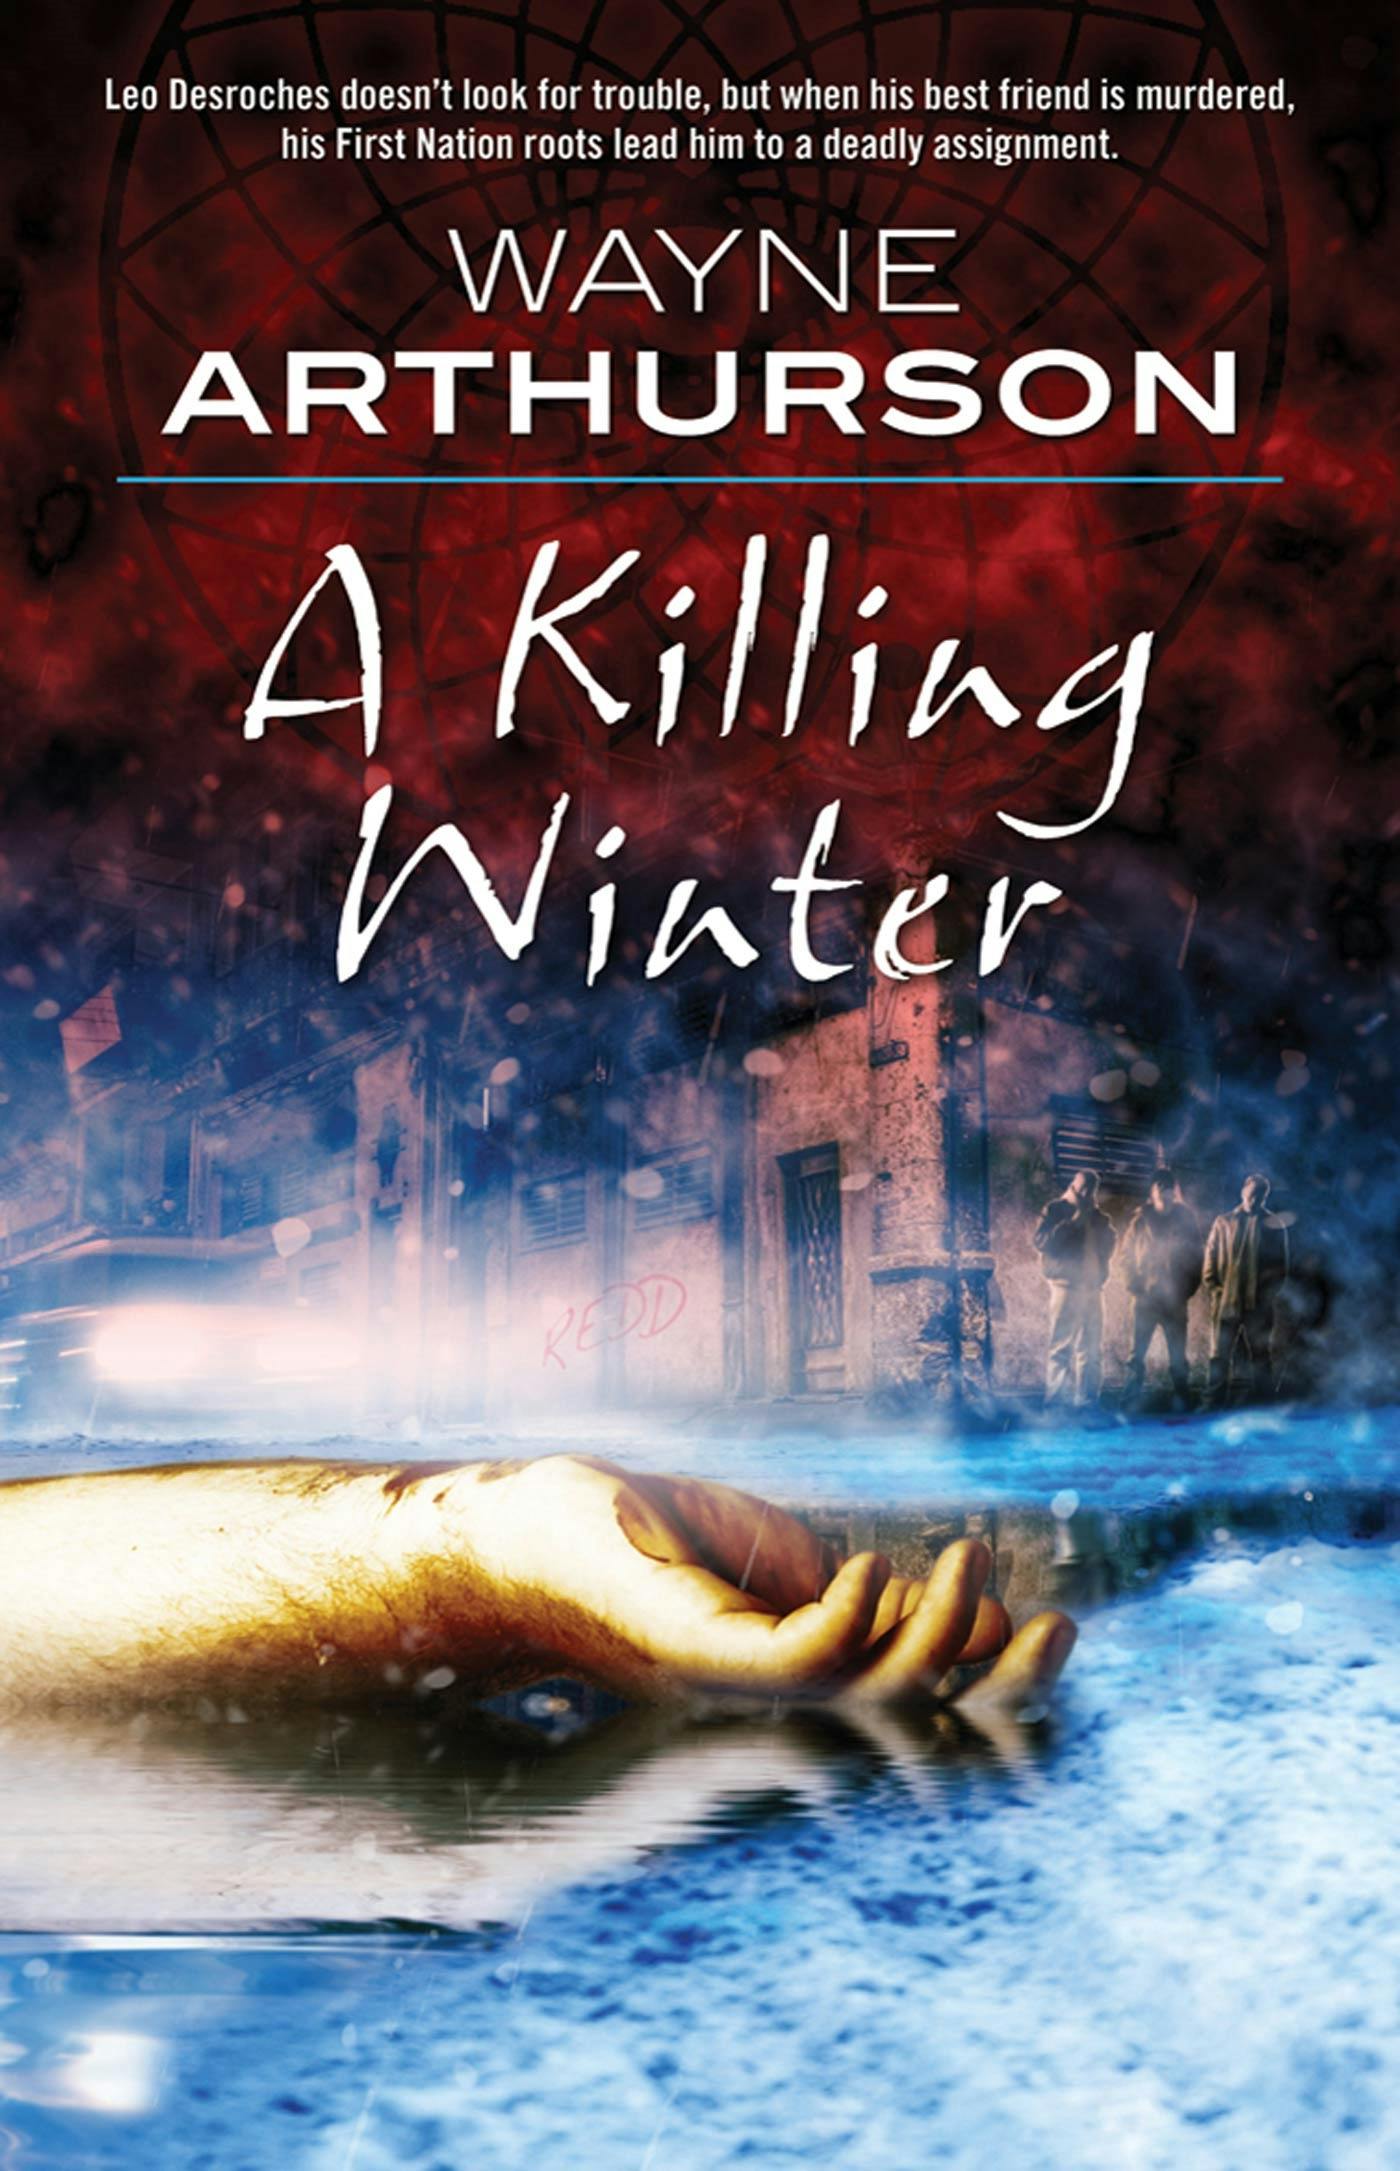 Cover for the book titled as: A Killing Winter